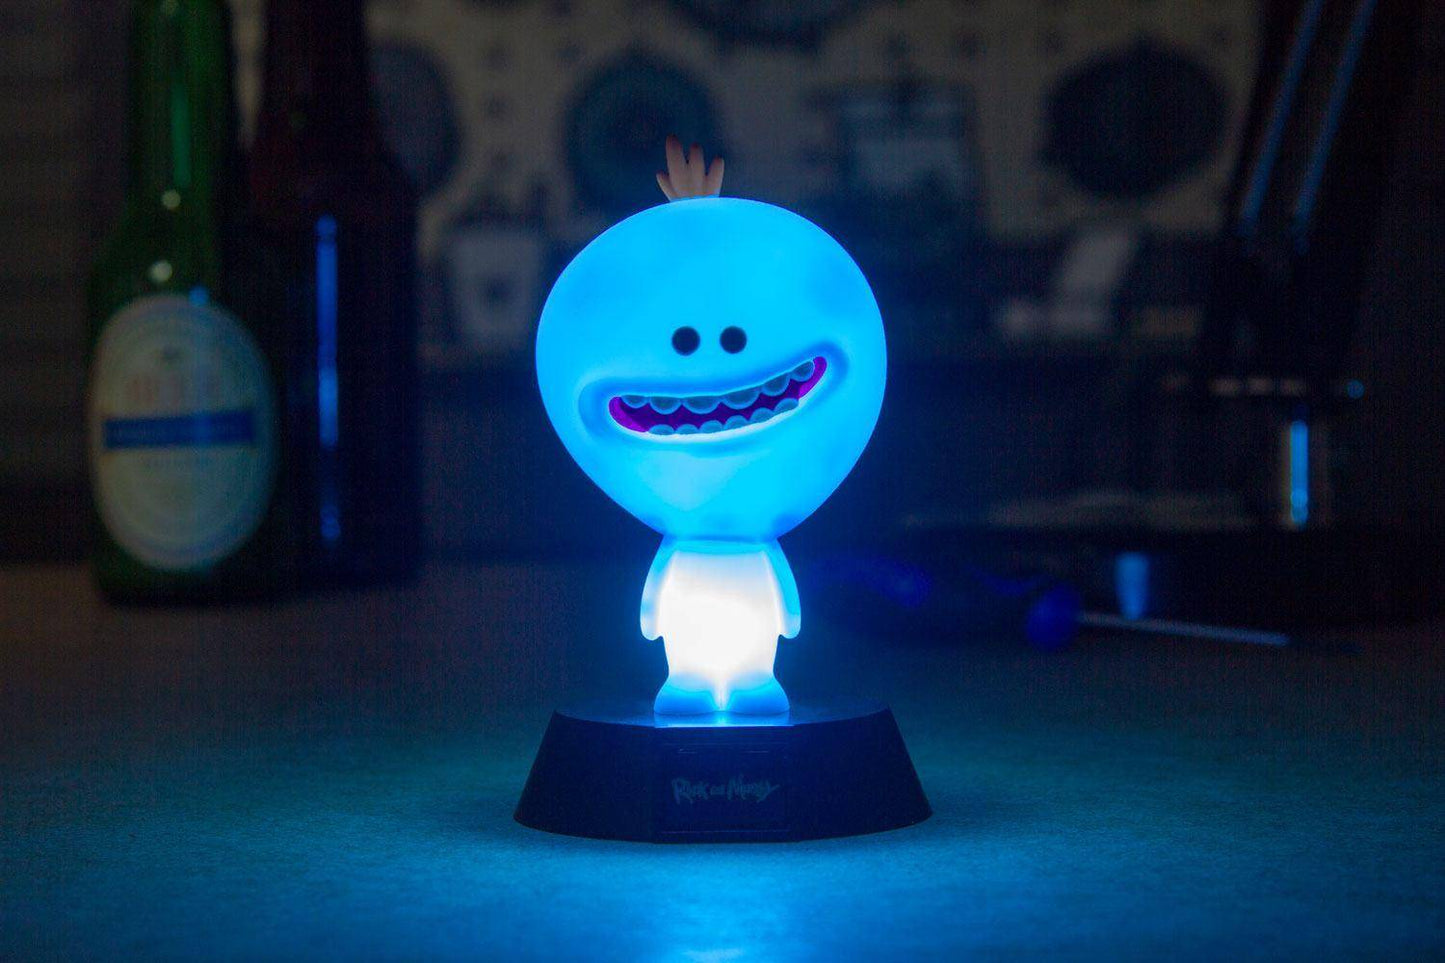 Rick and Morty 3D Icon Lampe Mr Meeseeks 10 cm